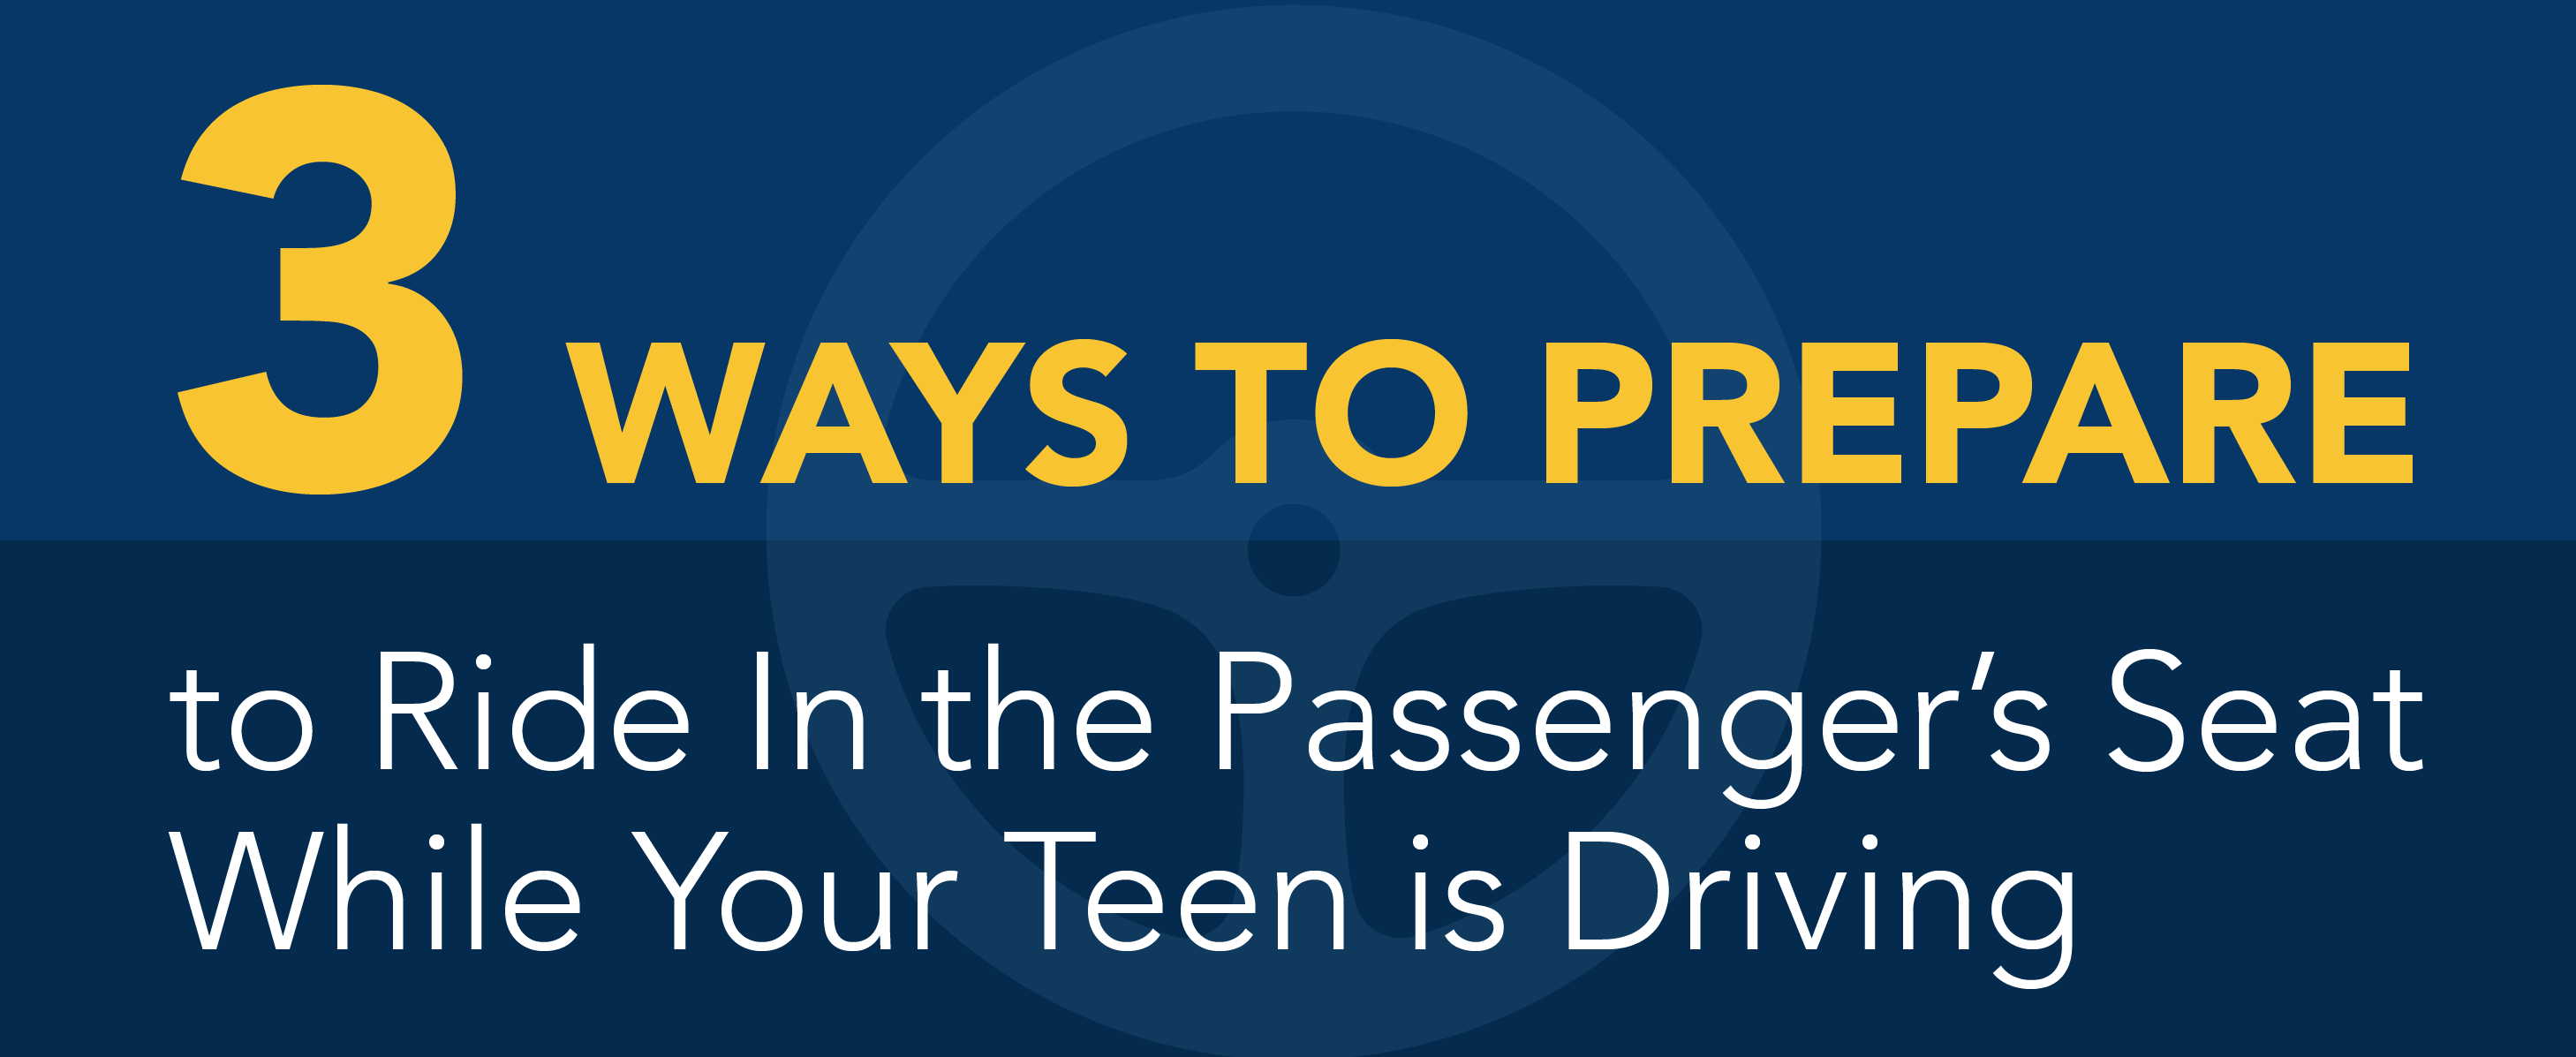 3 ways to prepare to ride in the passenger's seat while your teen is driving.